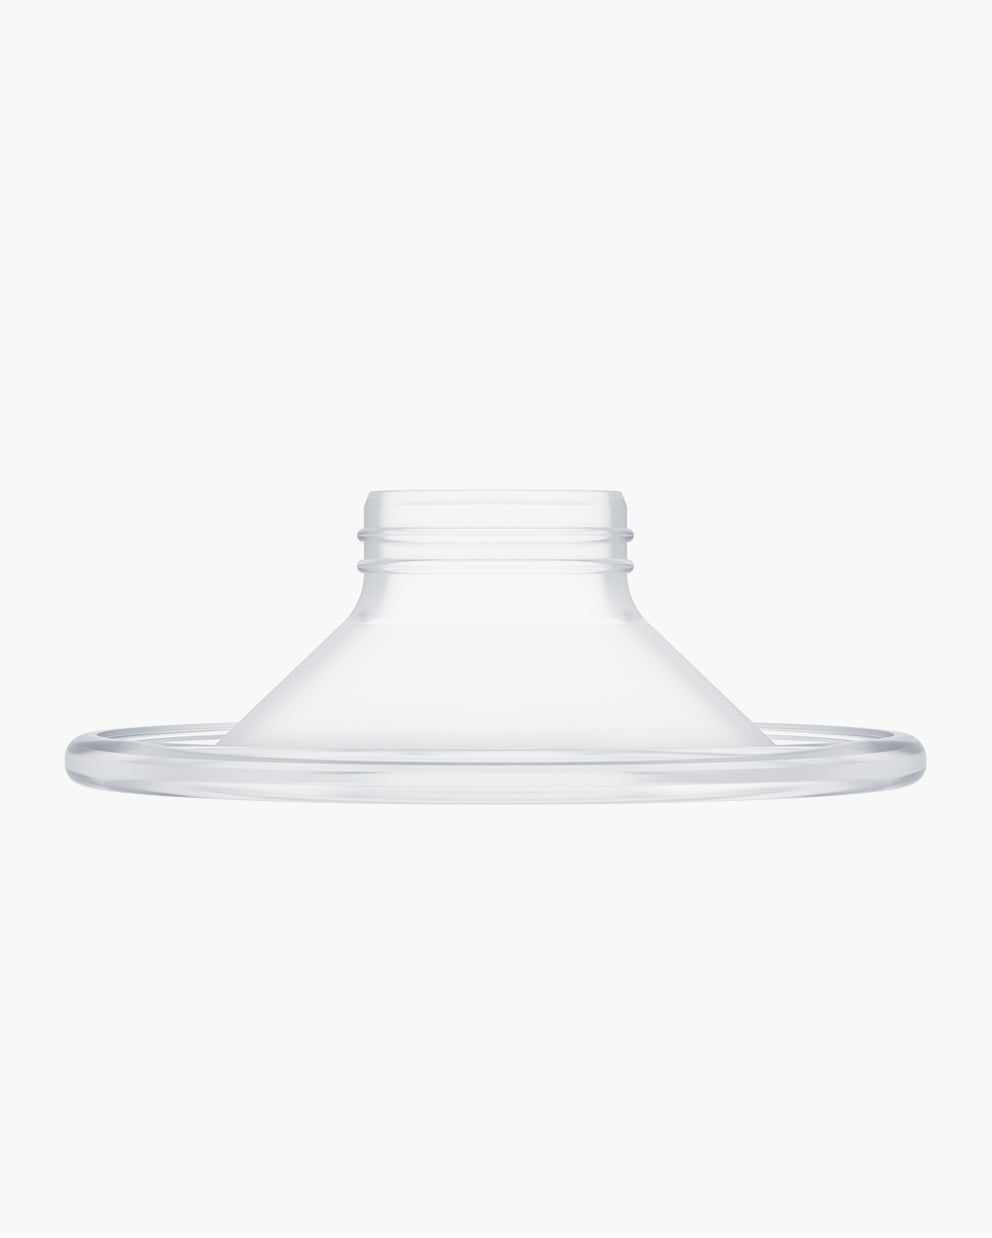 S9/S12 Breast Pump Replacement Parts